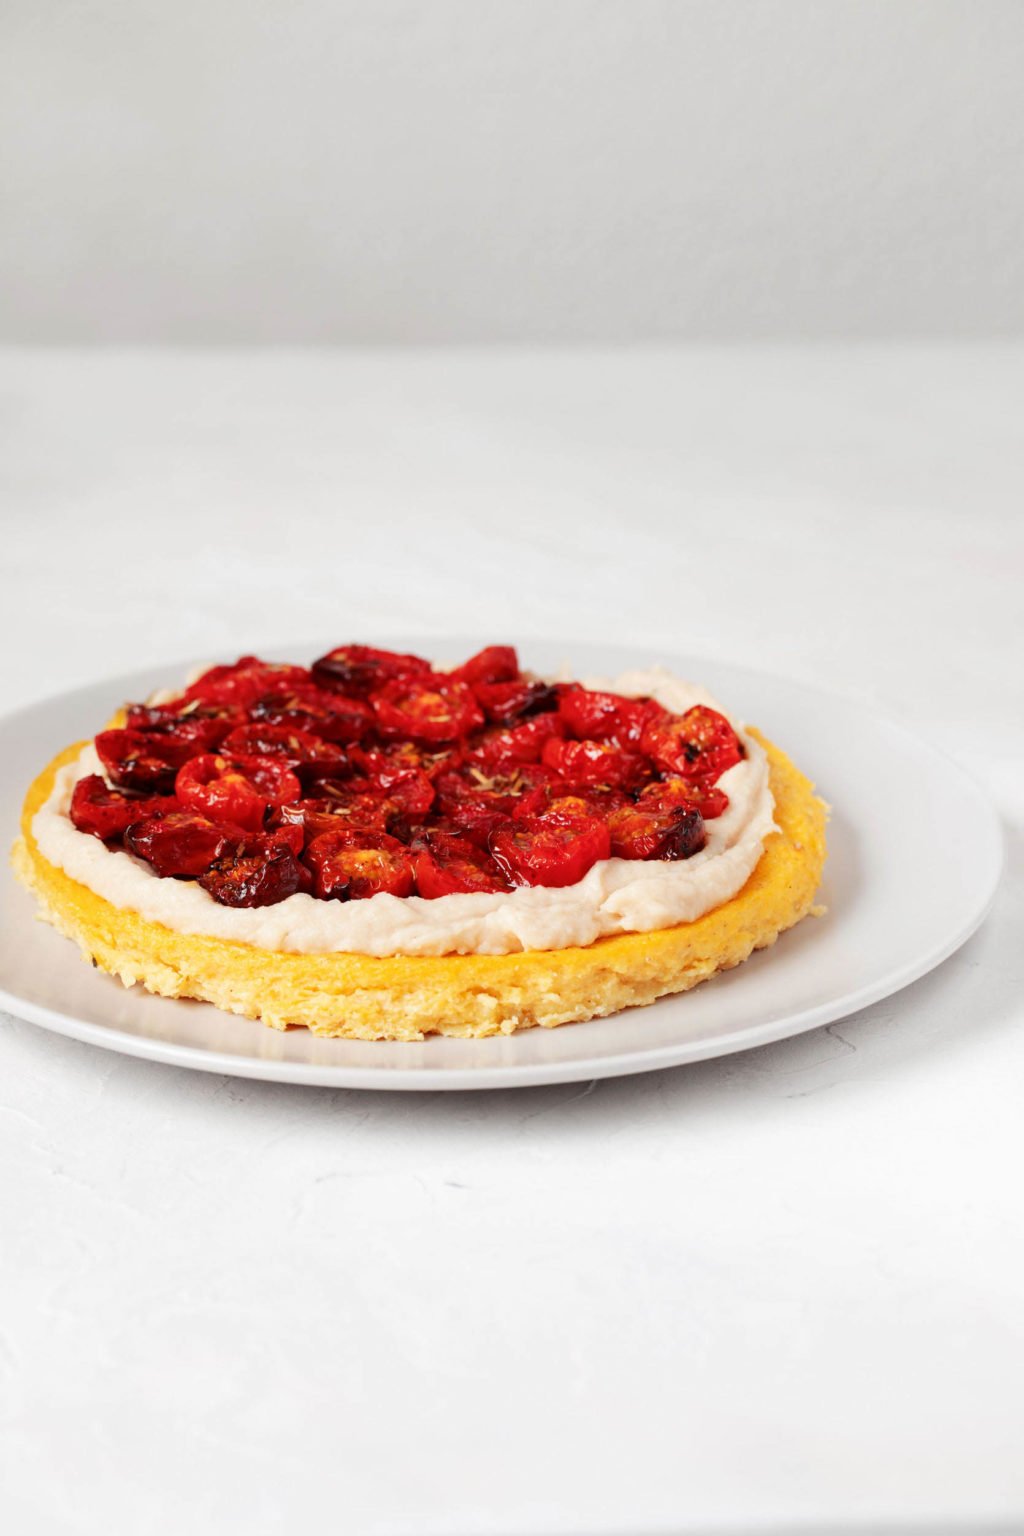 A wide-rimmed, round white plate is holding a summer appetizer with fresh tomatoes. It rests on a white surface.